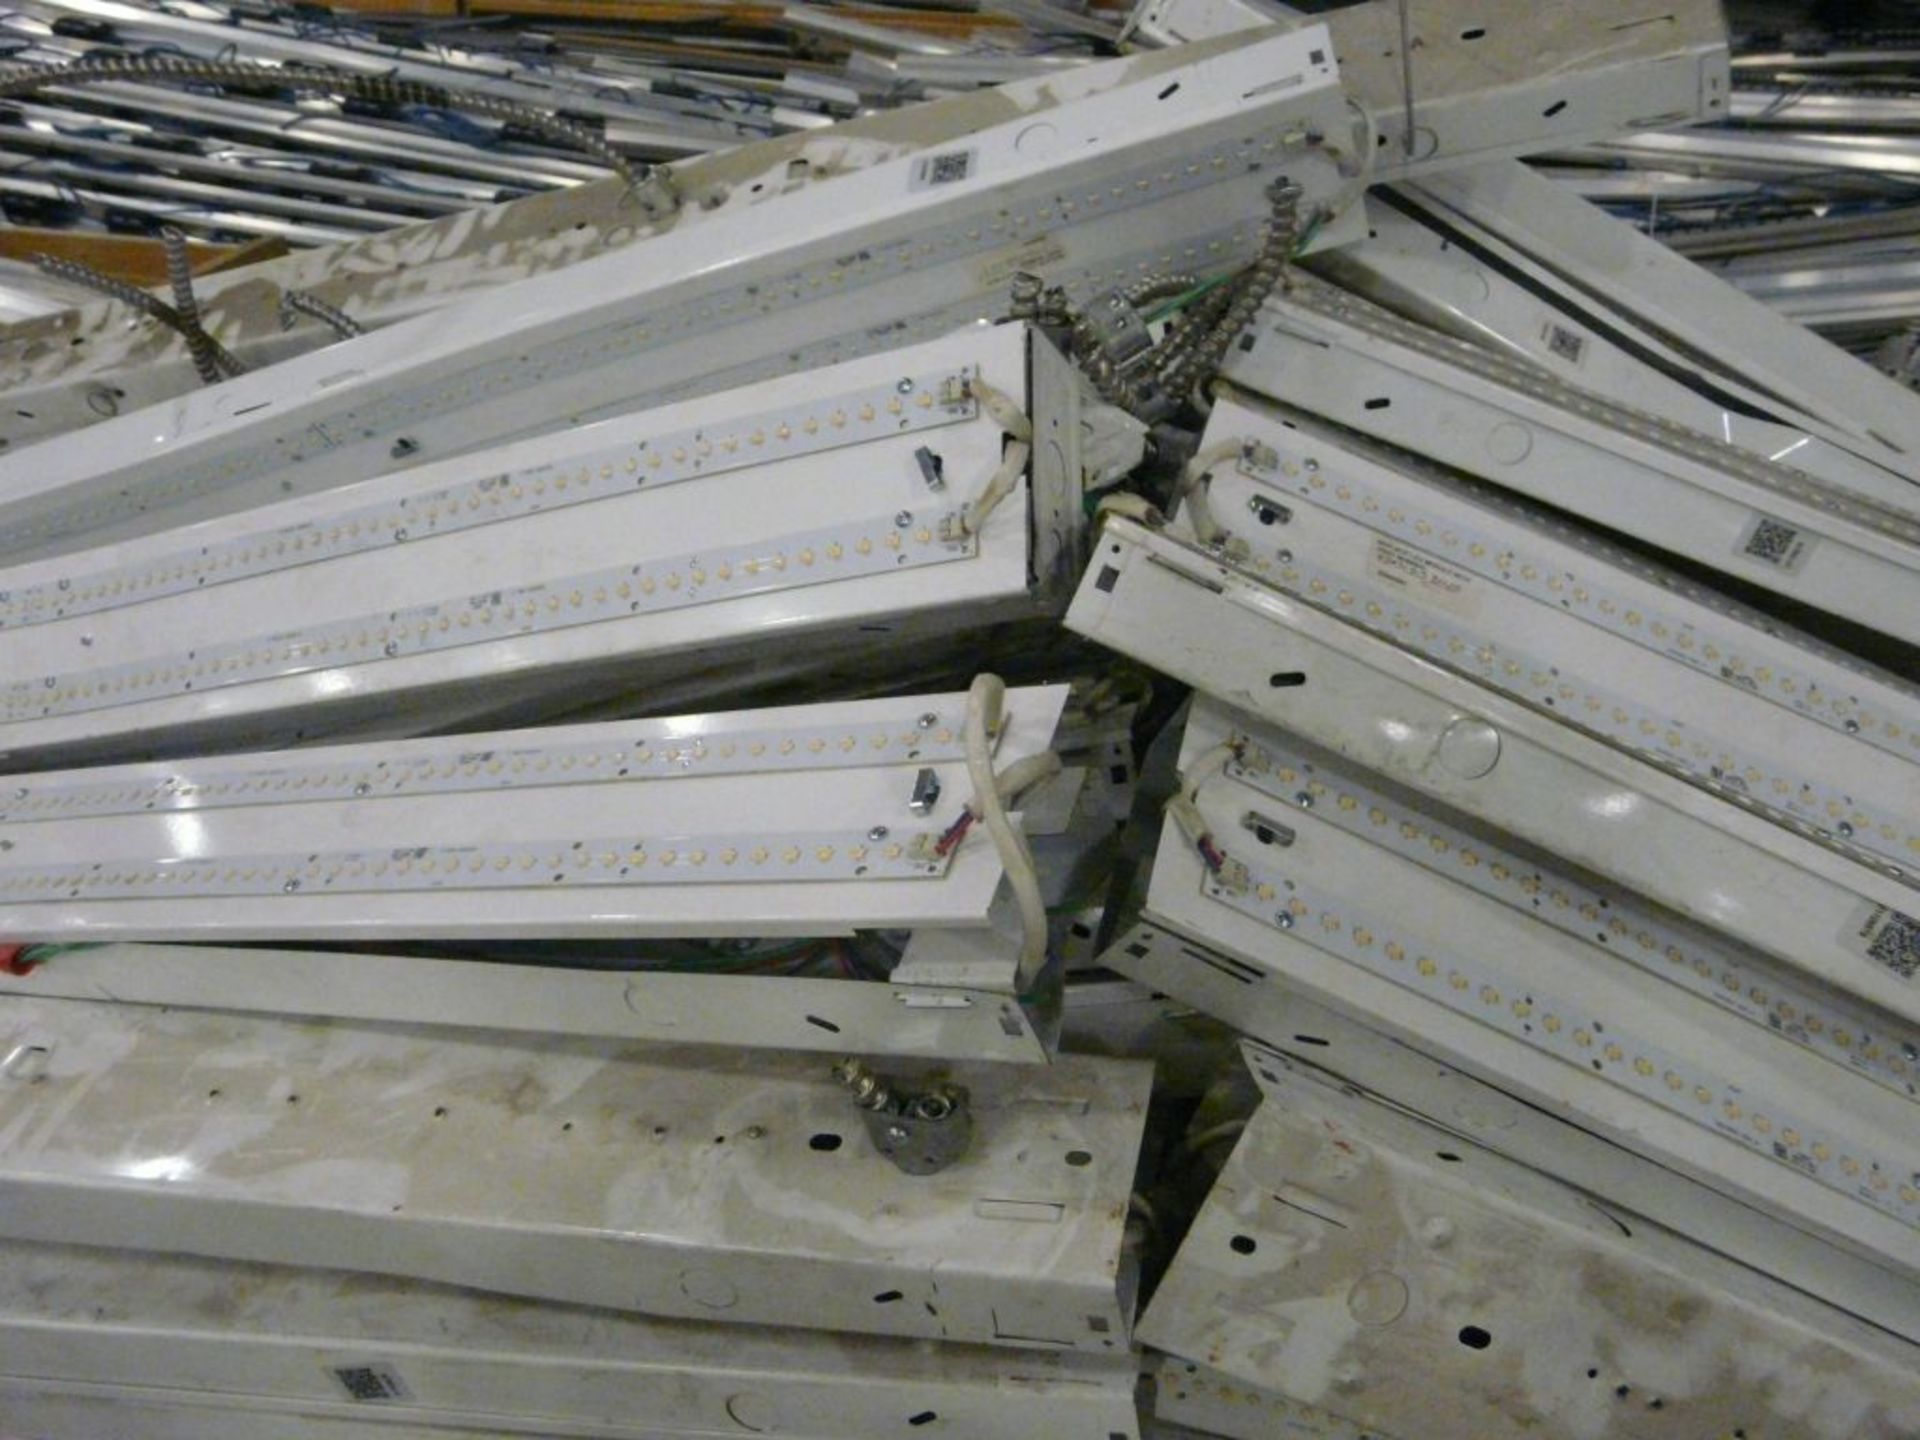 Crate of LED Modules - Tag: 222333; Lot Loading Fee: $30 - Image 4 of 5